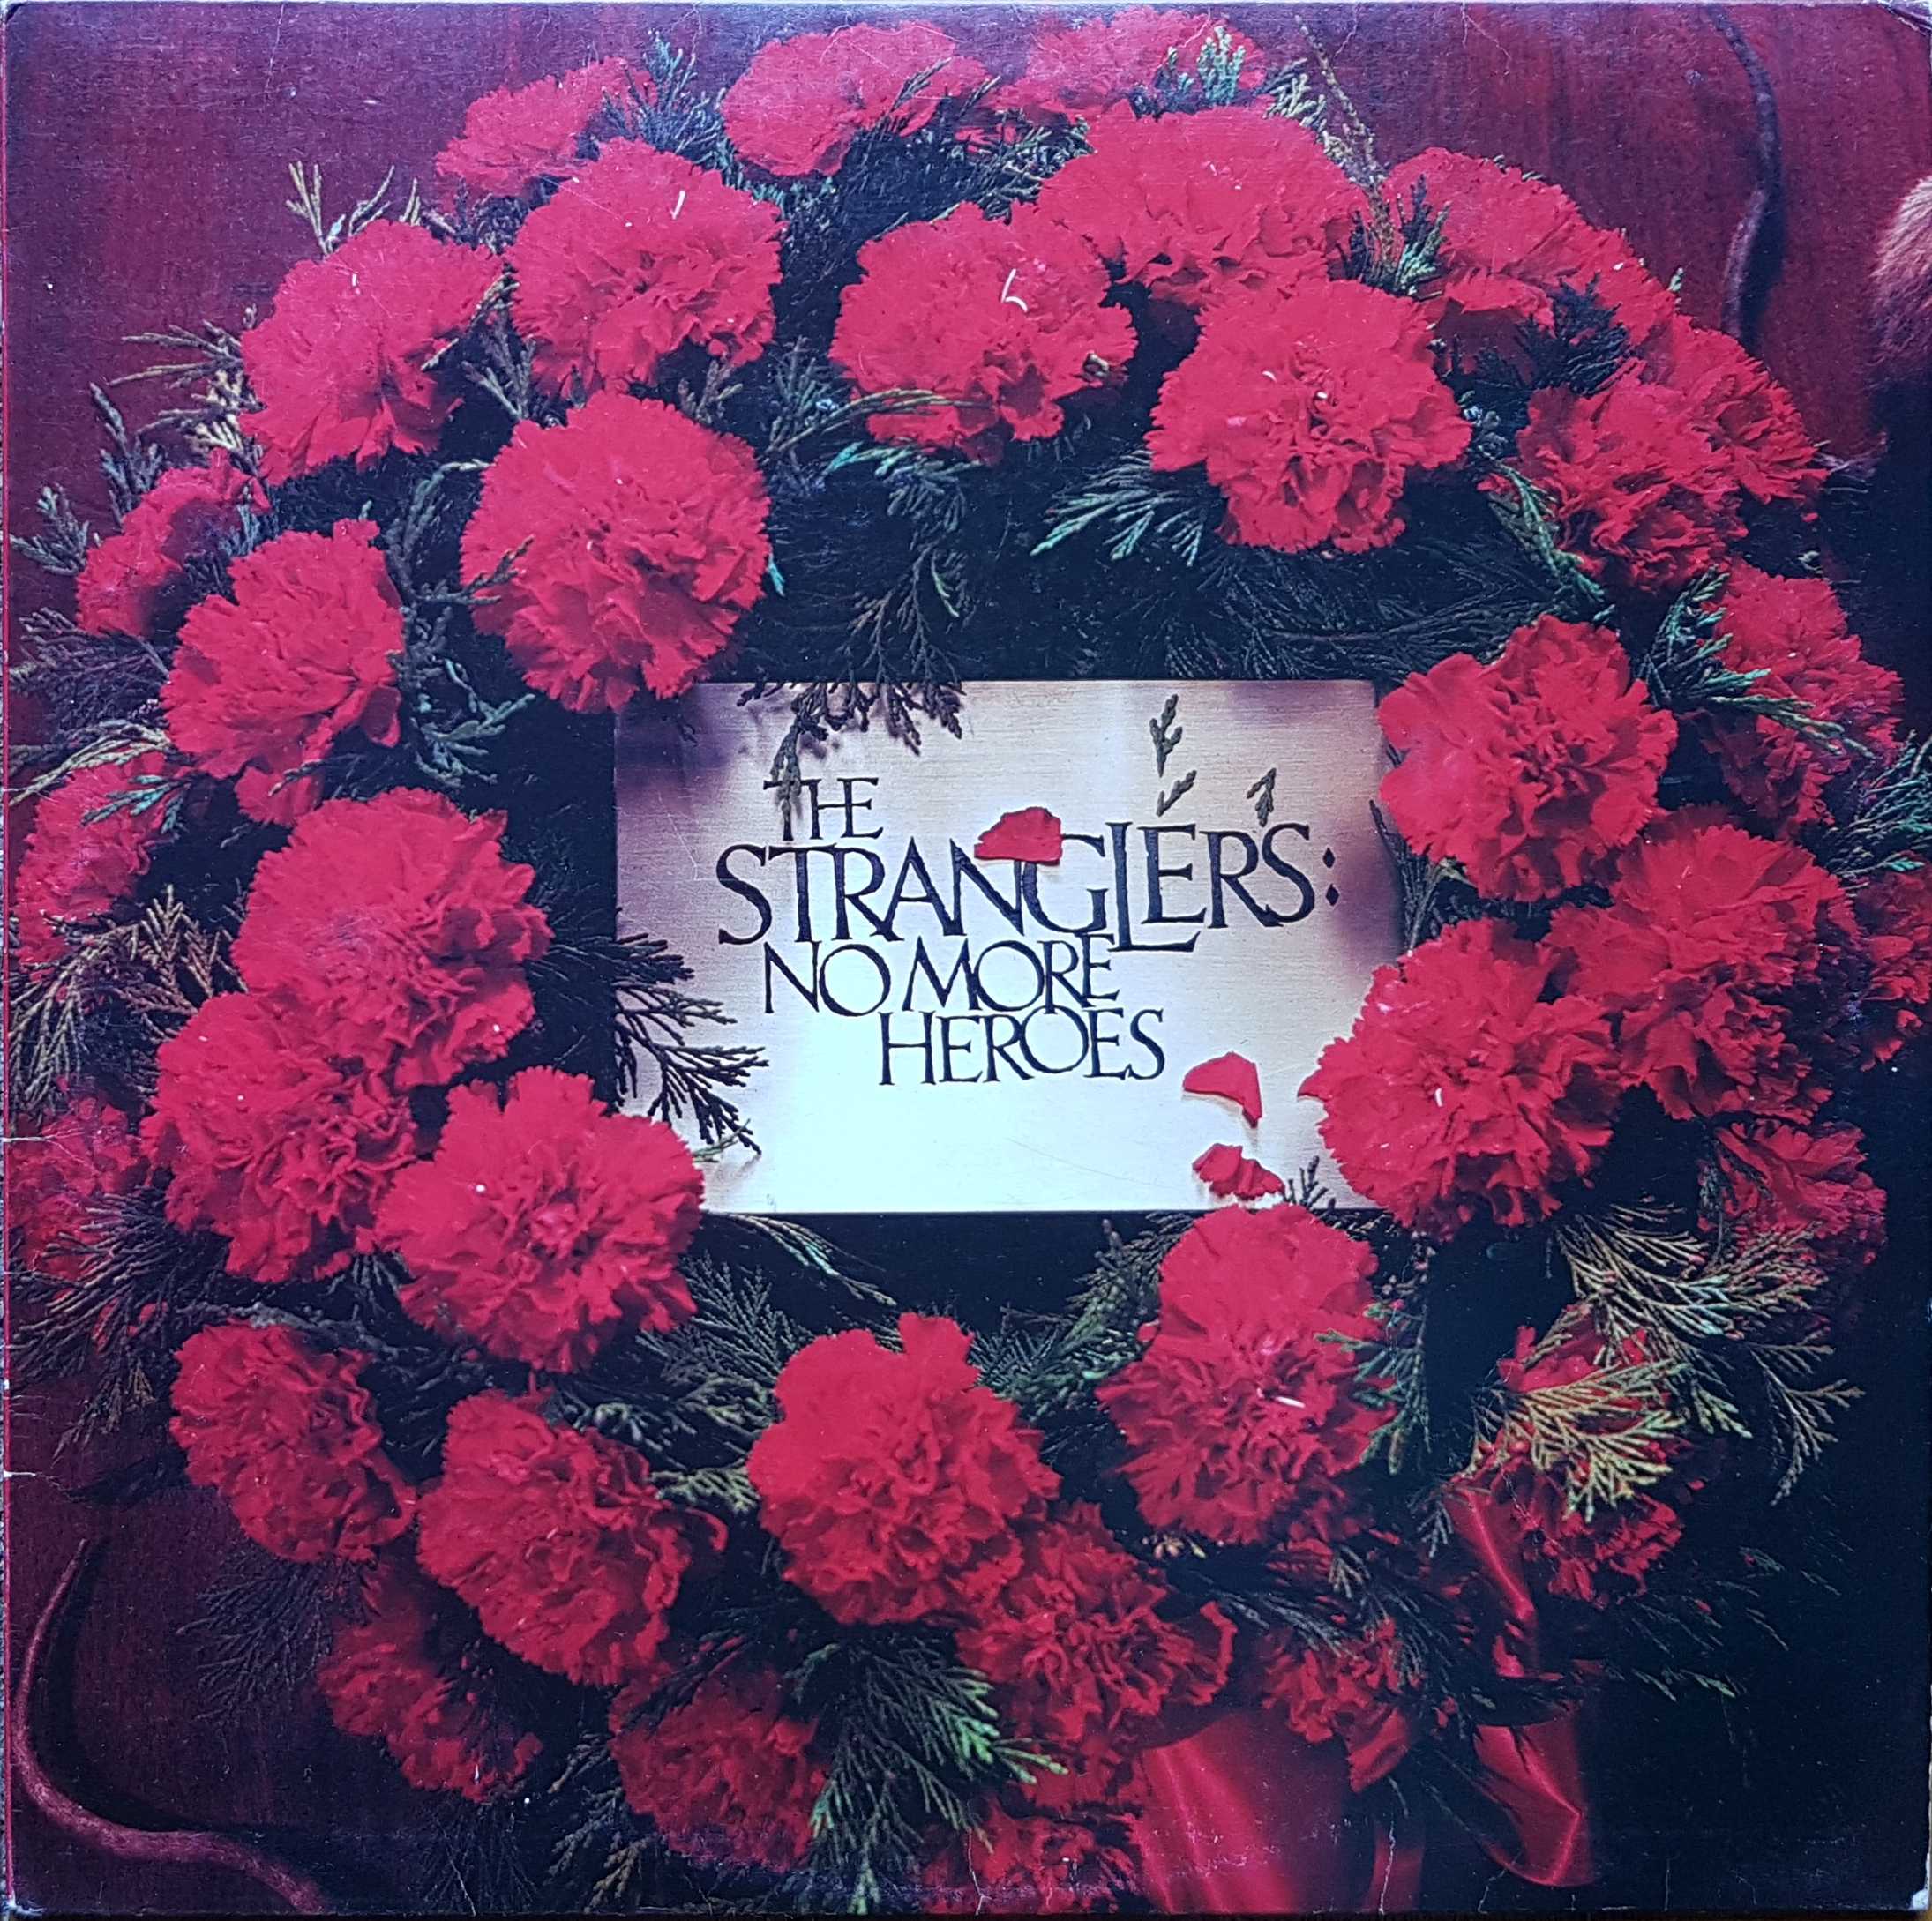 Picture of UAG 30200 No more heroes by artist The Stranglers from The Stranglers